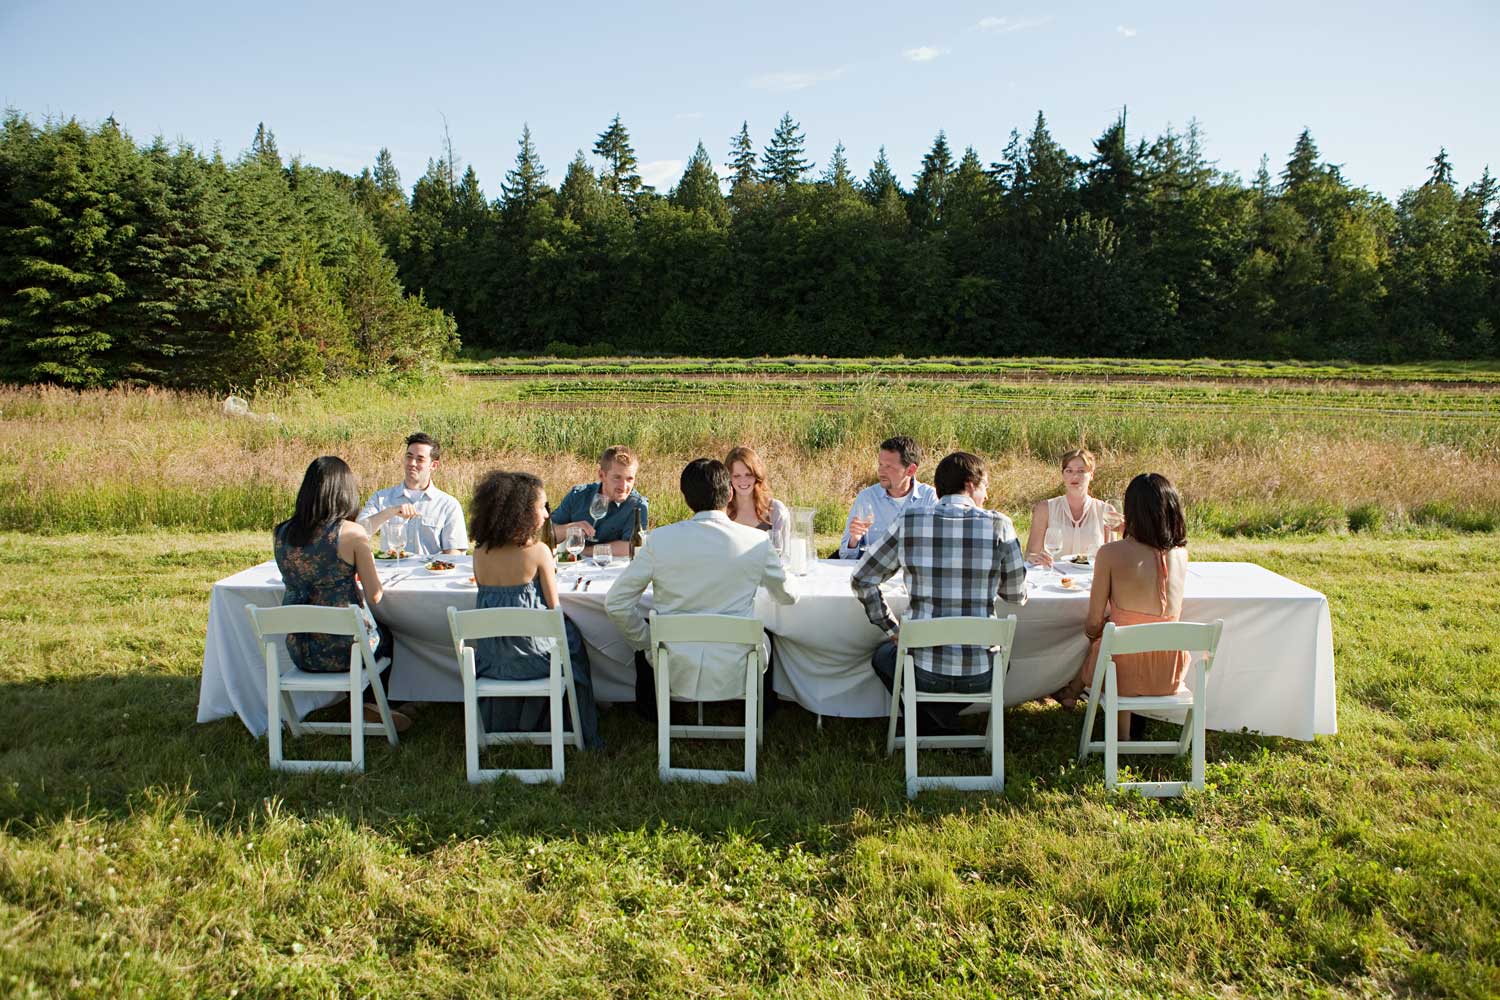 An outdoor dinner party gathering in a field.